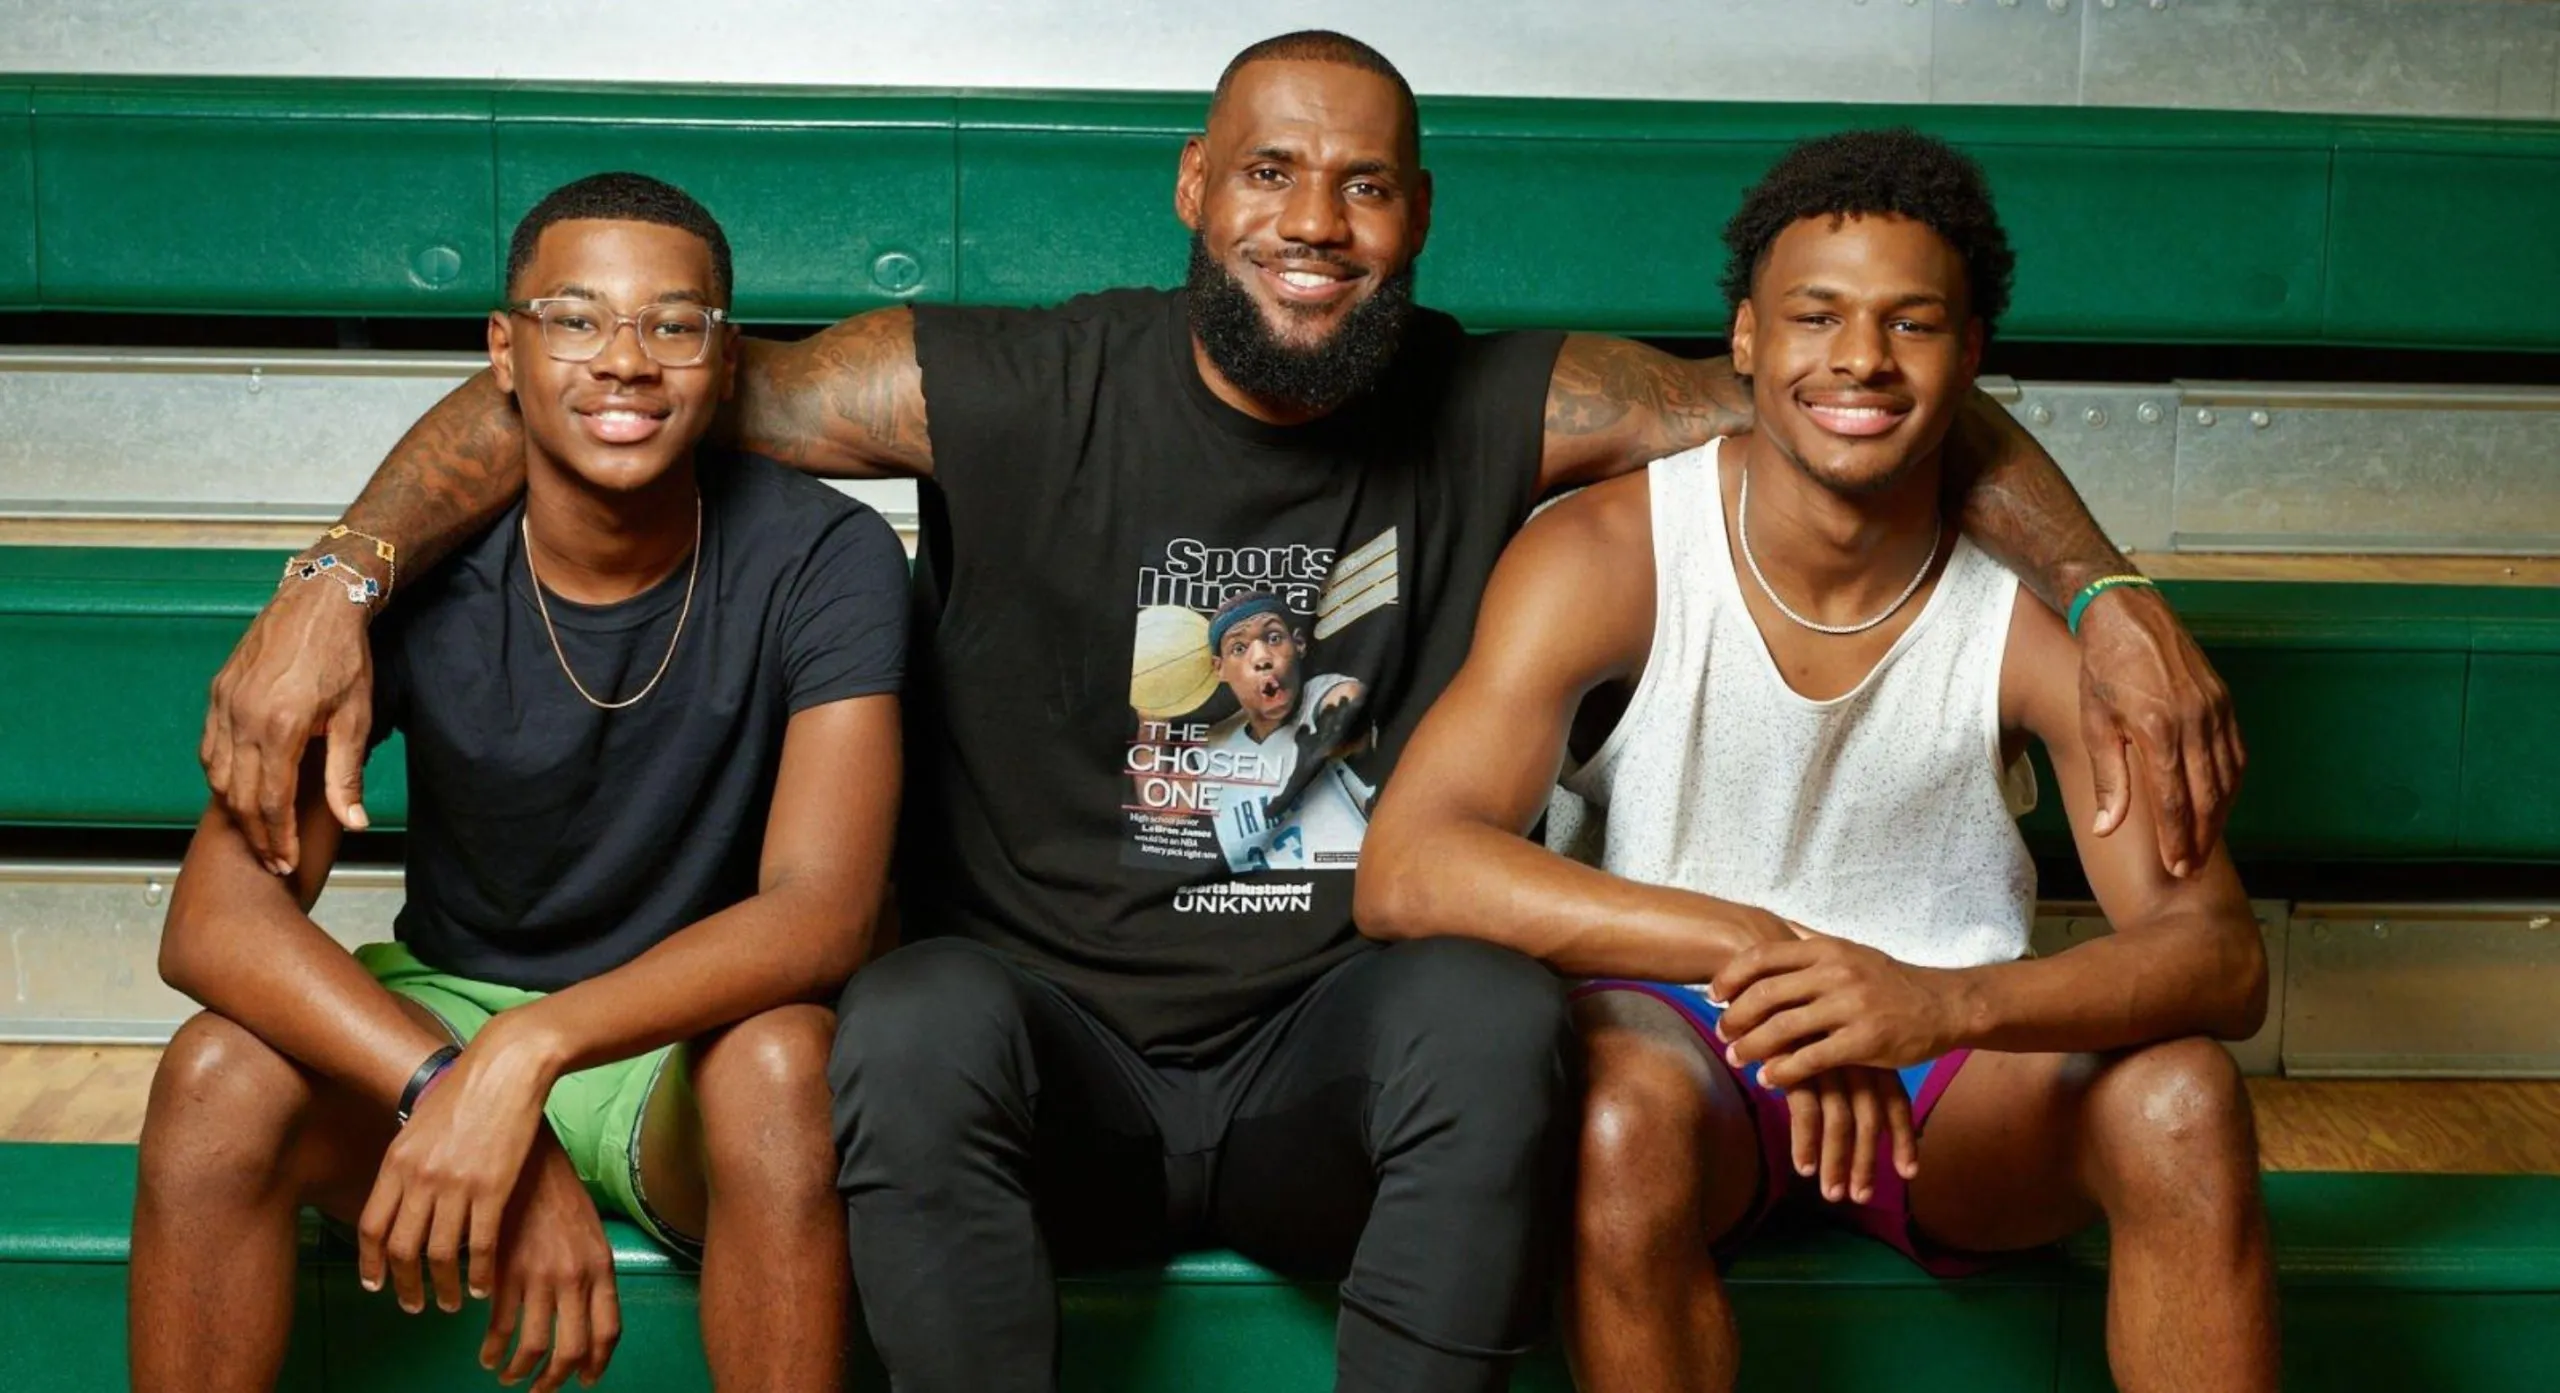 '#JamesGang to pull up in Atlanta' as LeBron James Implicates Departure from the Lakers on IG!